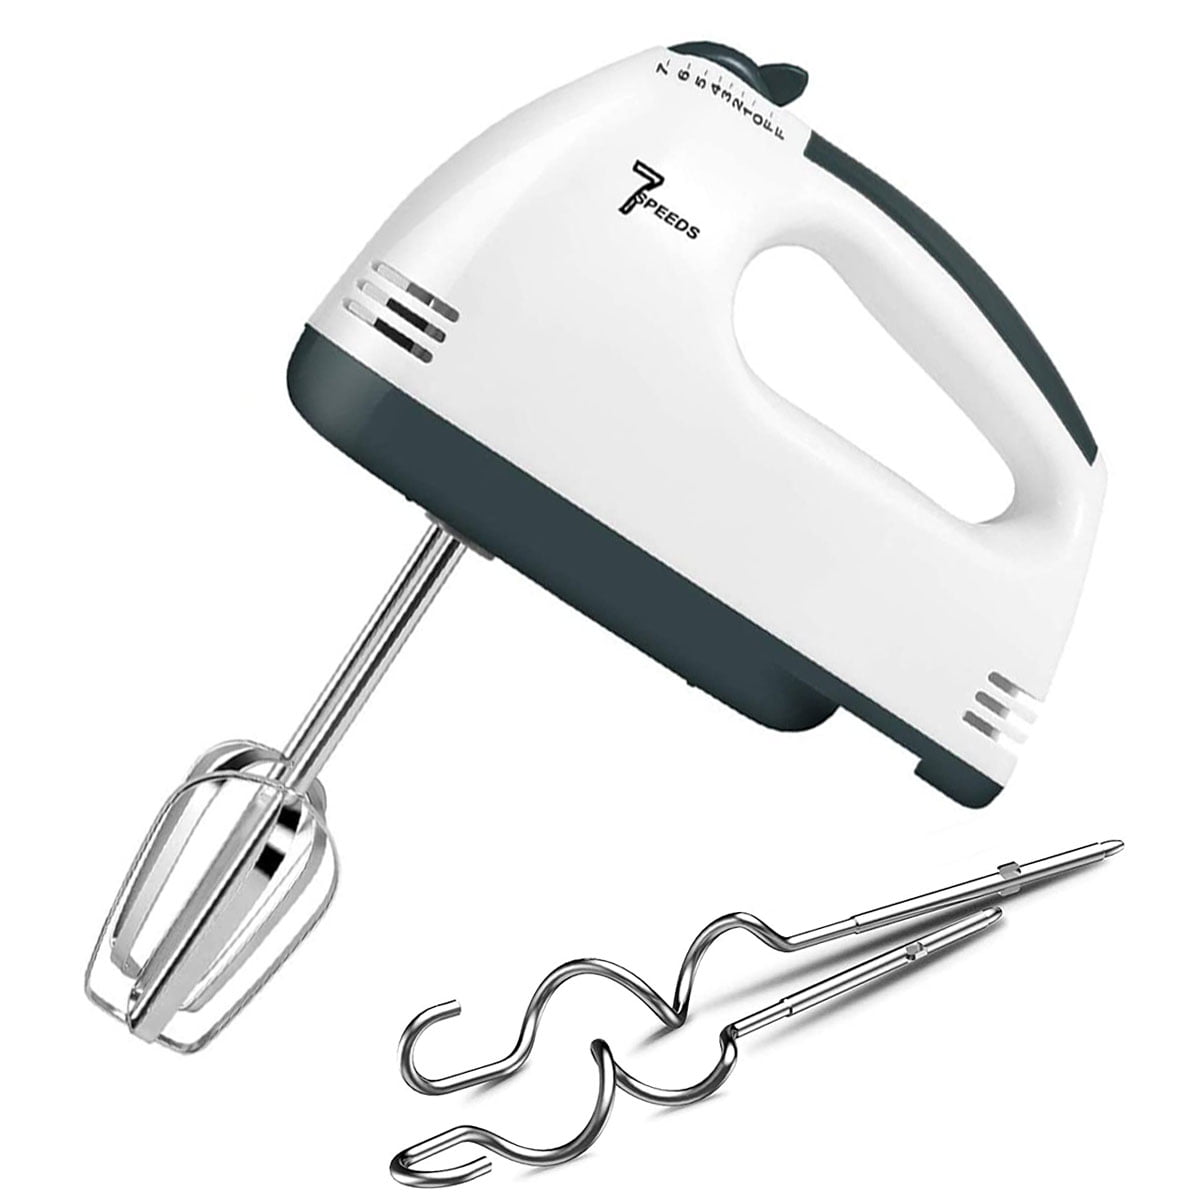 5 Speed Classic Stainless Steel Mixer Ultra Power Electric Mixer with Turbo and Easy Eject Button Silver Durable Handheld Mixer Includes Sturdy Beaters and Dough Hooks Hand Mixer 